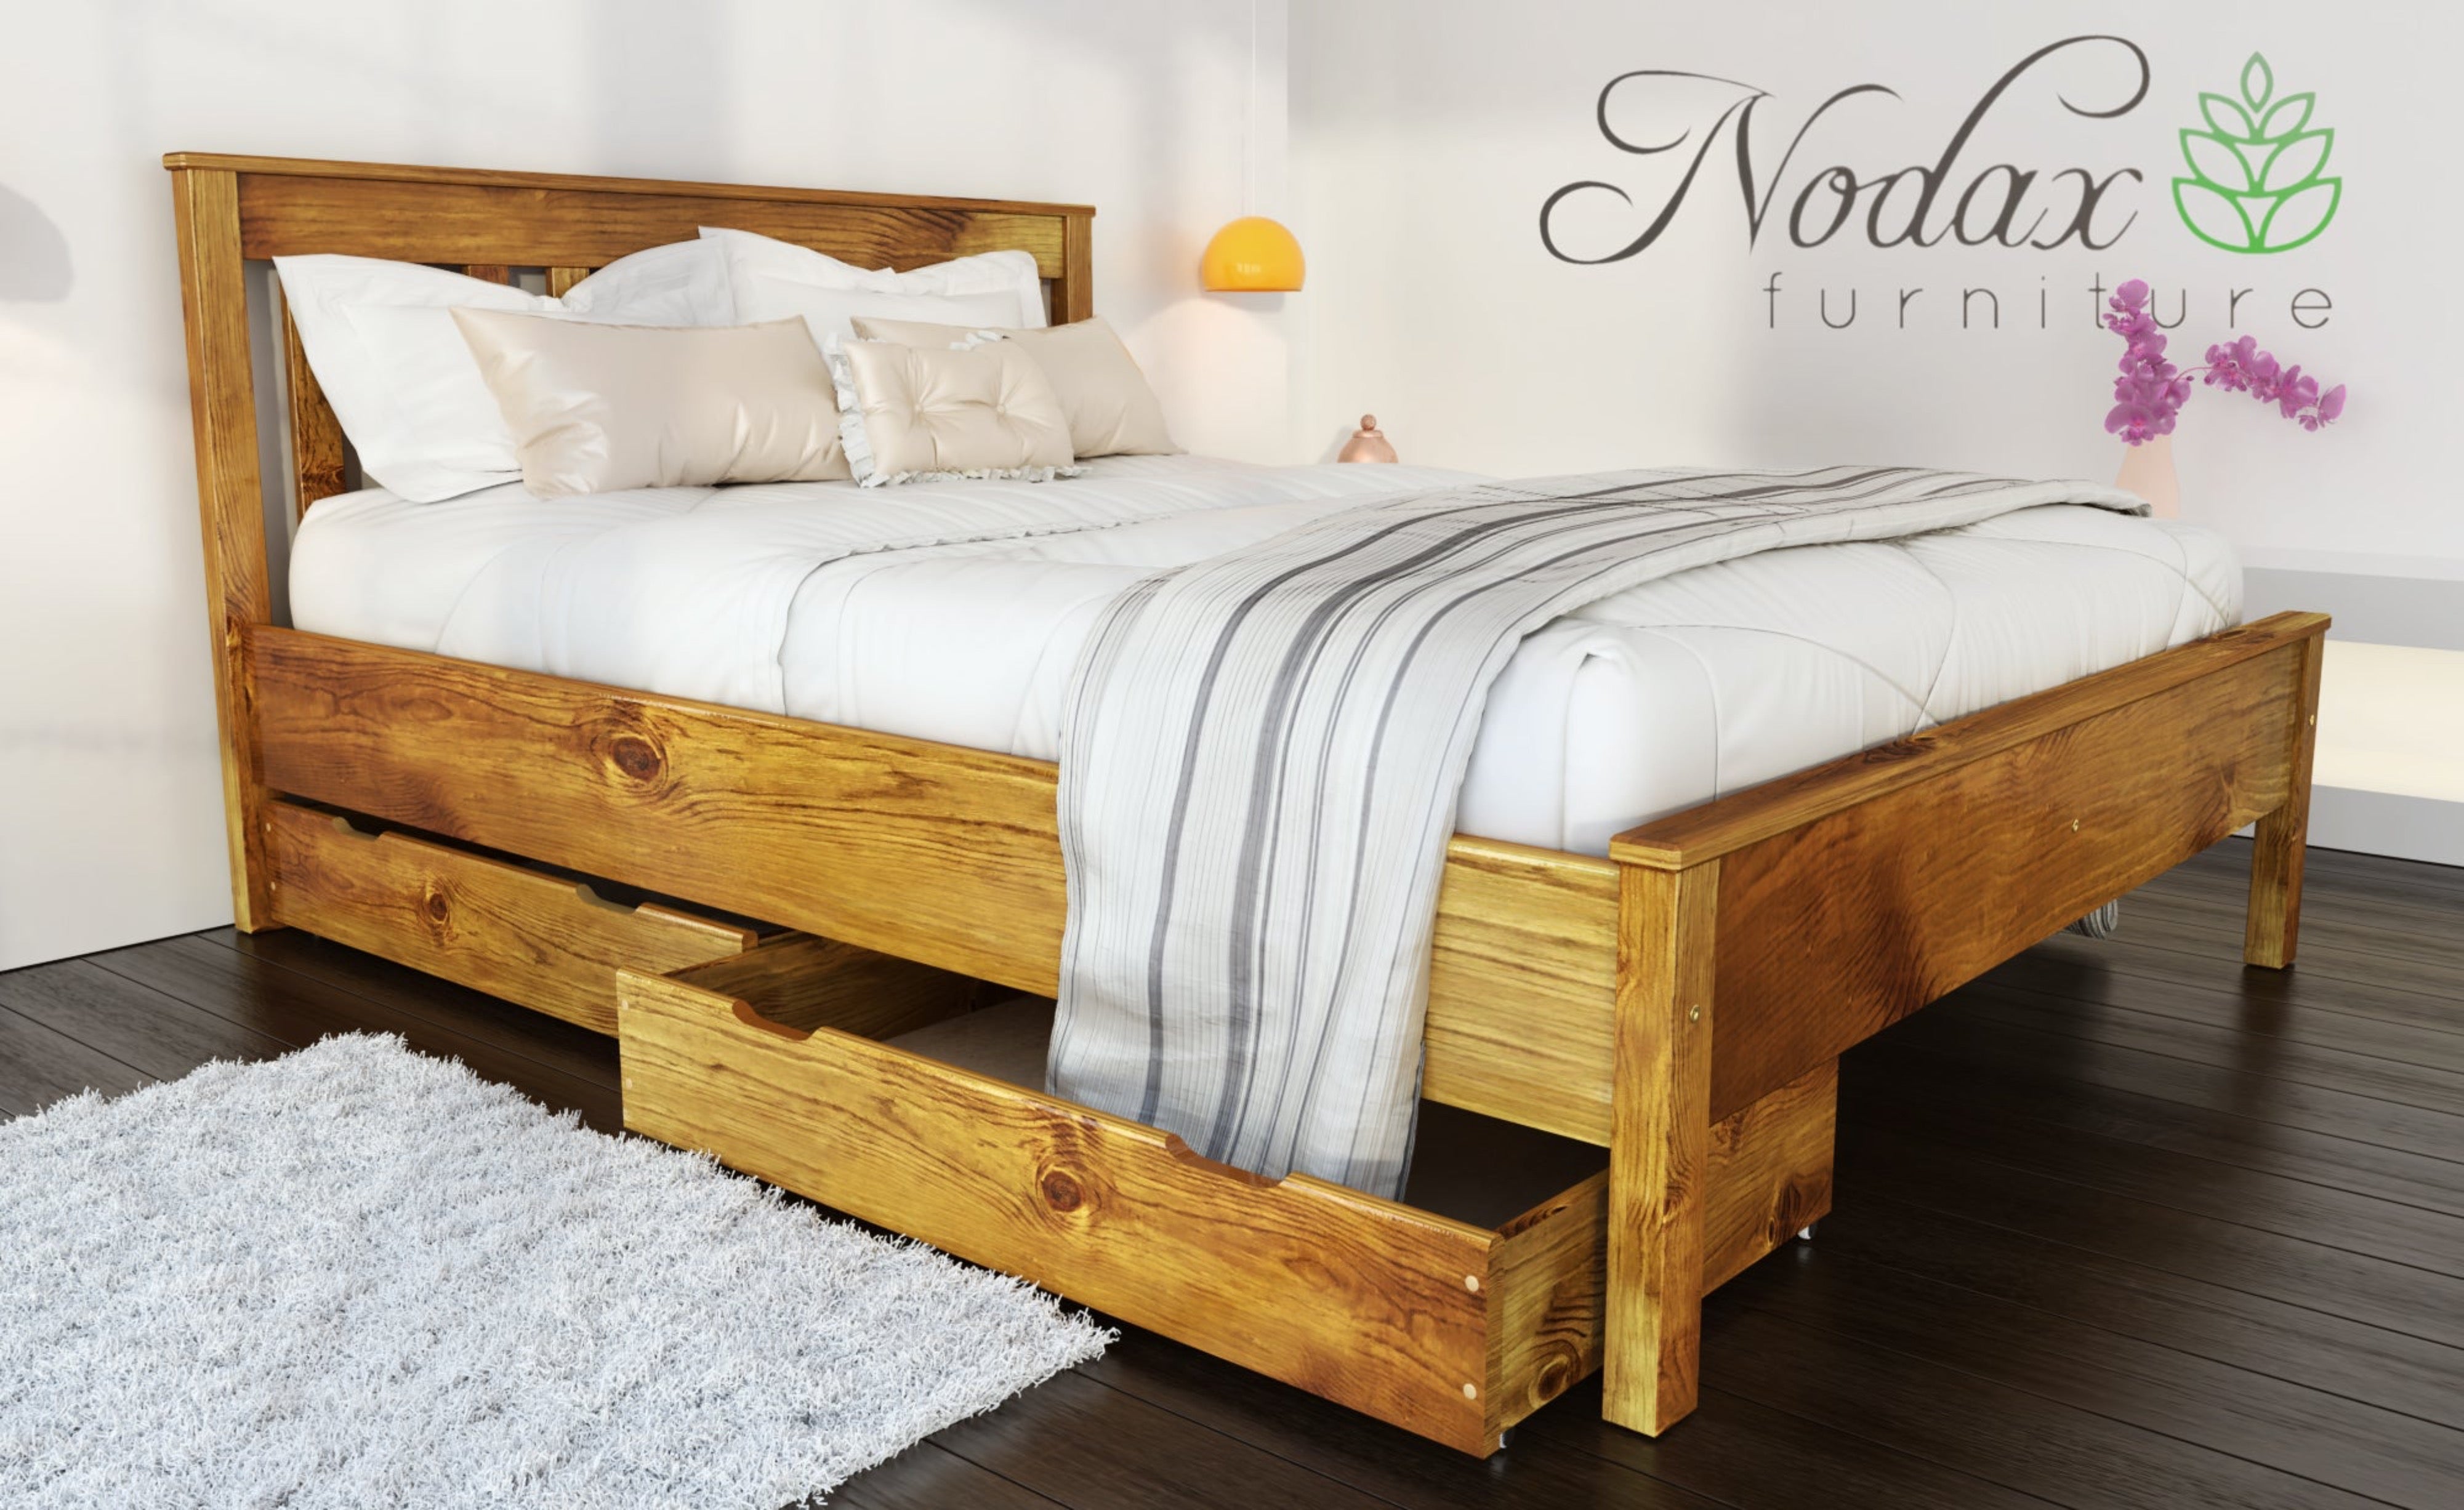 Wooden-bed-frames-king-double-size-4ft6in